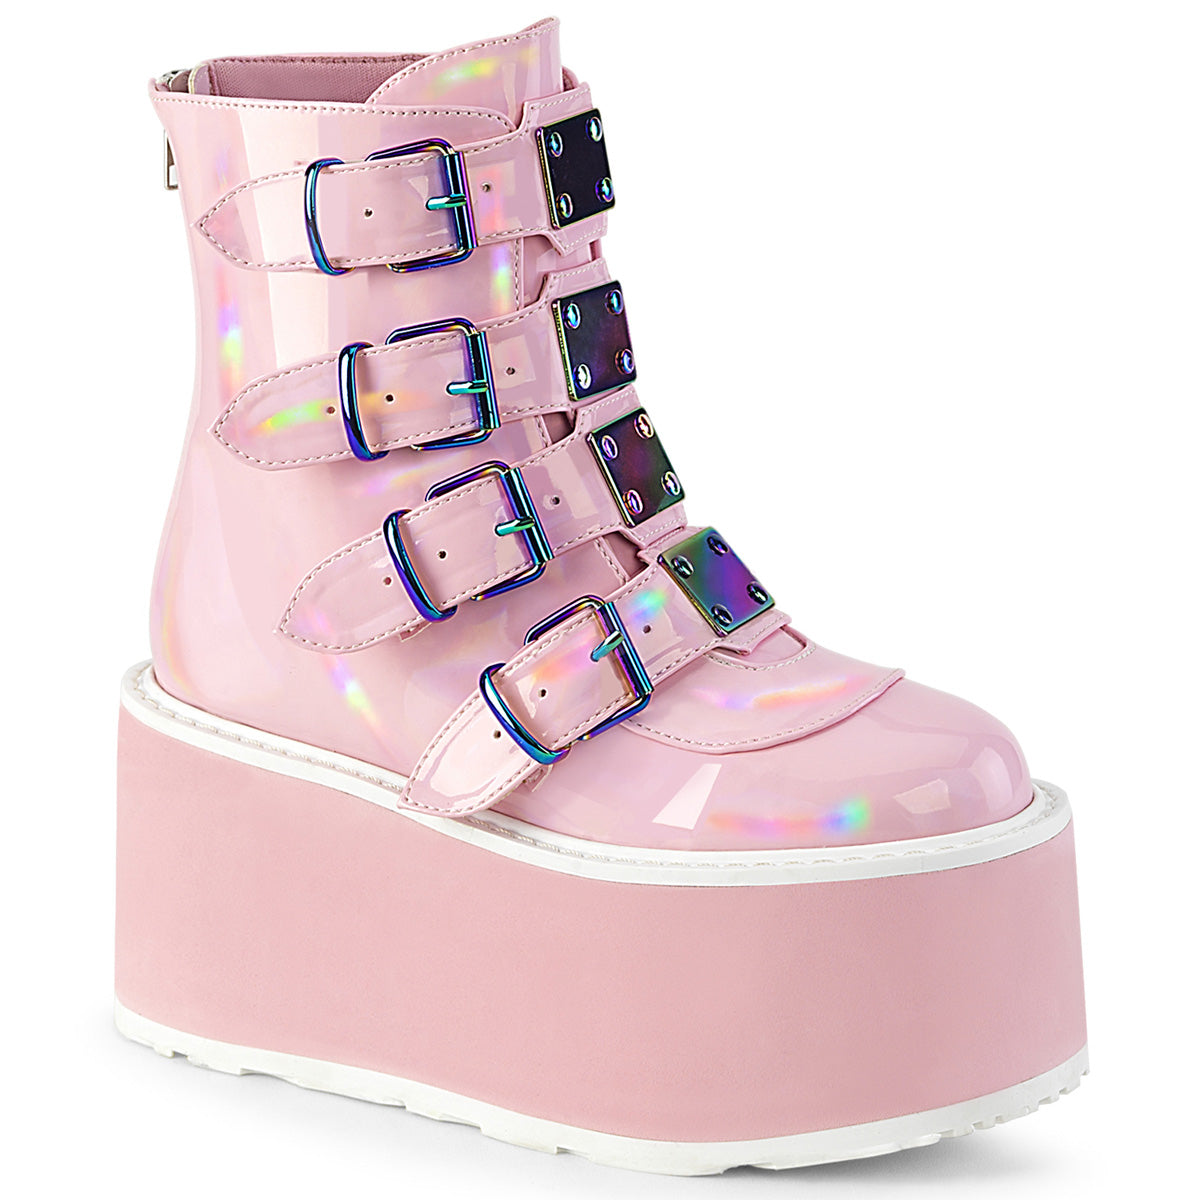 DemoniaCult  Ankle Boots DAMNED-105 B. Pink Holo Pat